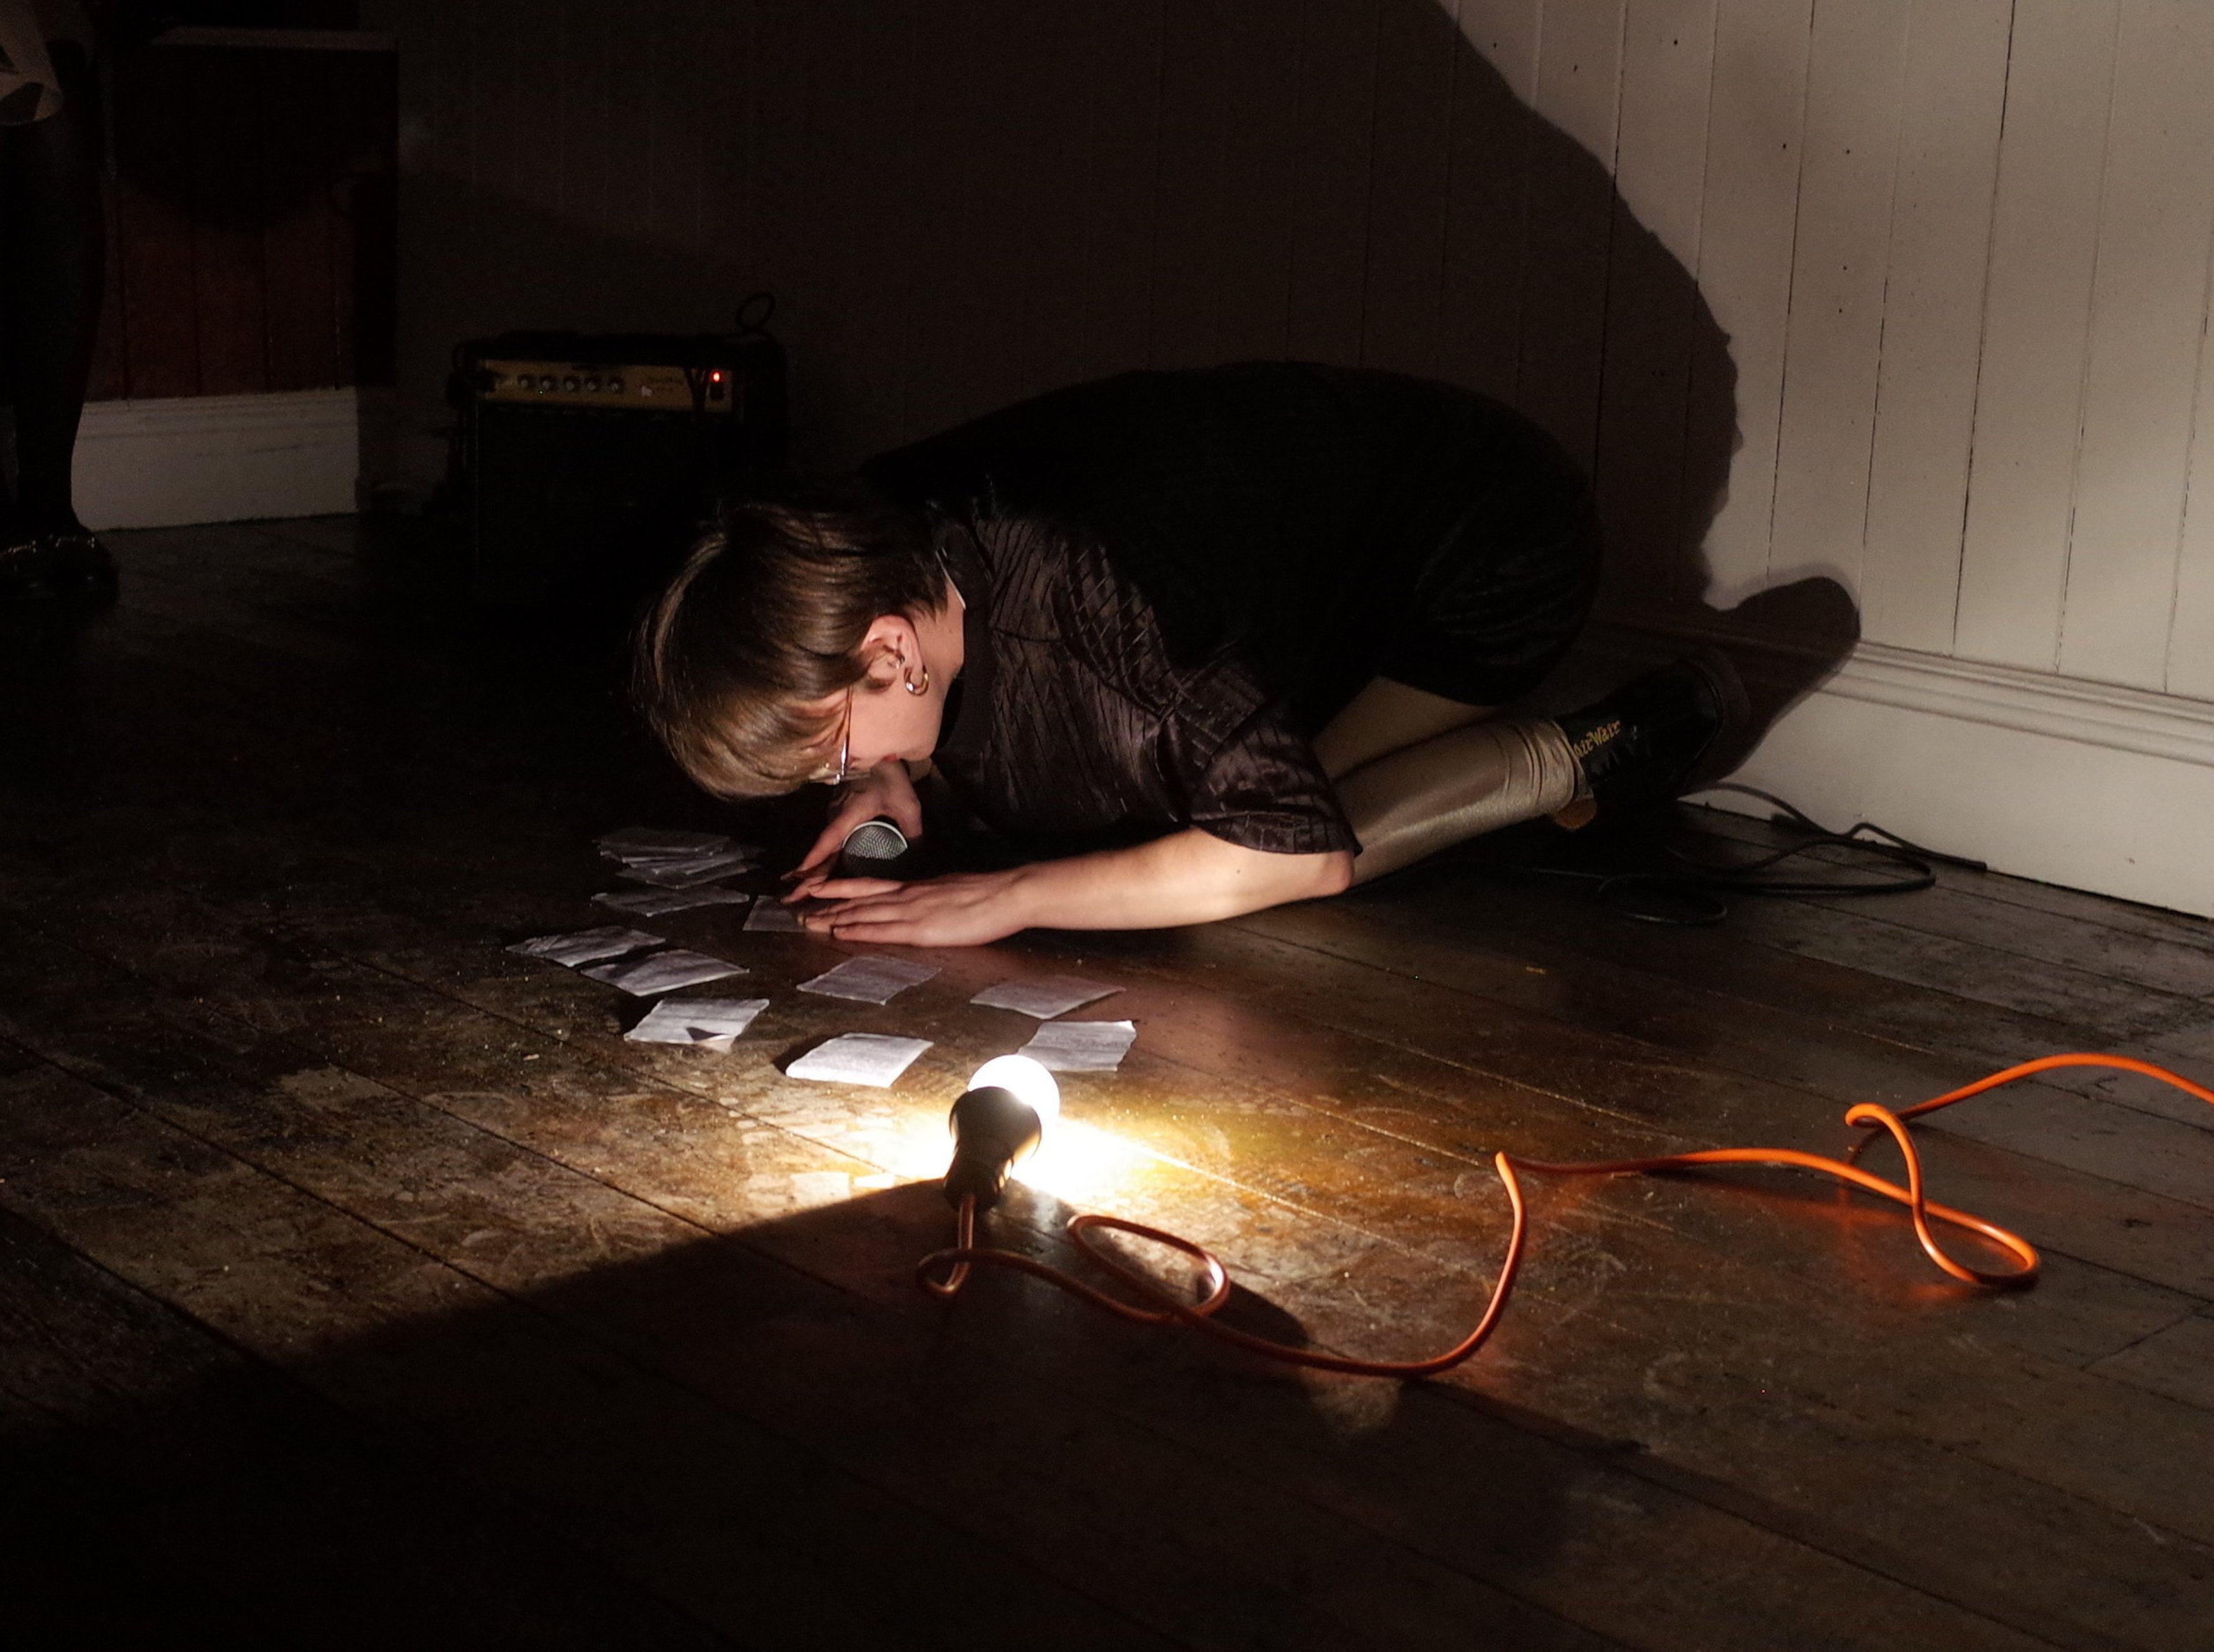 Performance, Roy Claire Potter kneeling down to pieces of paper, reading with a dim light.